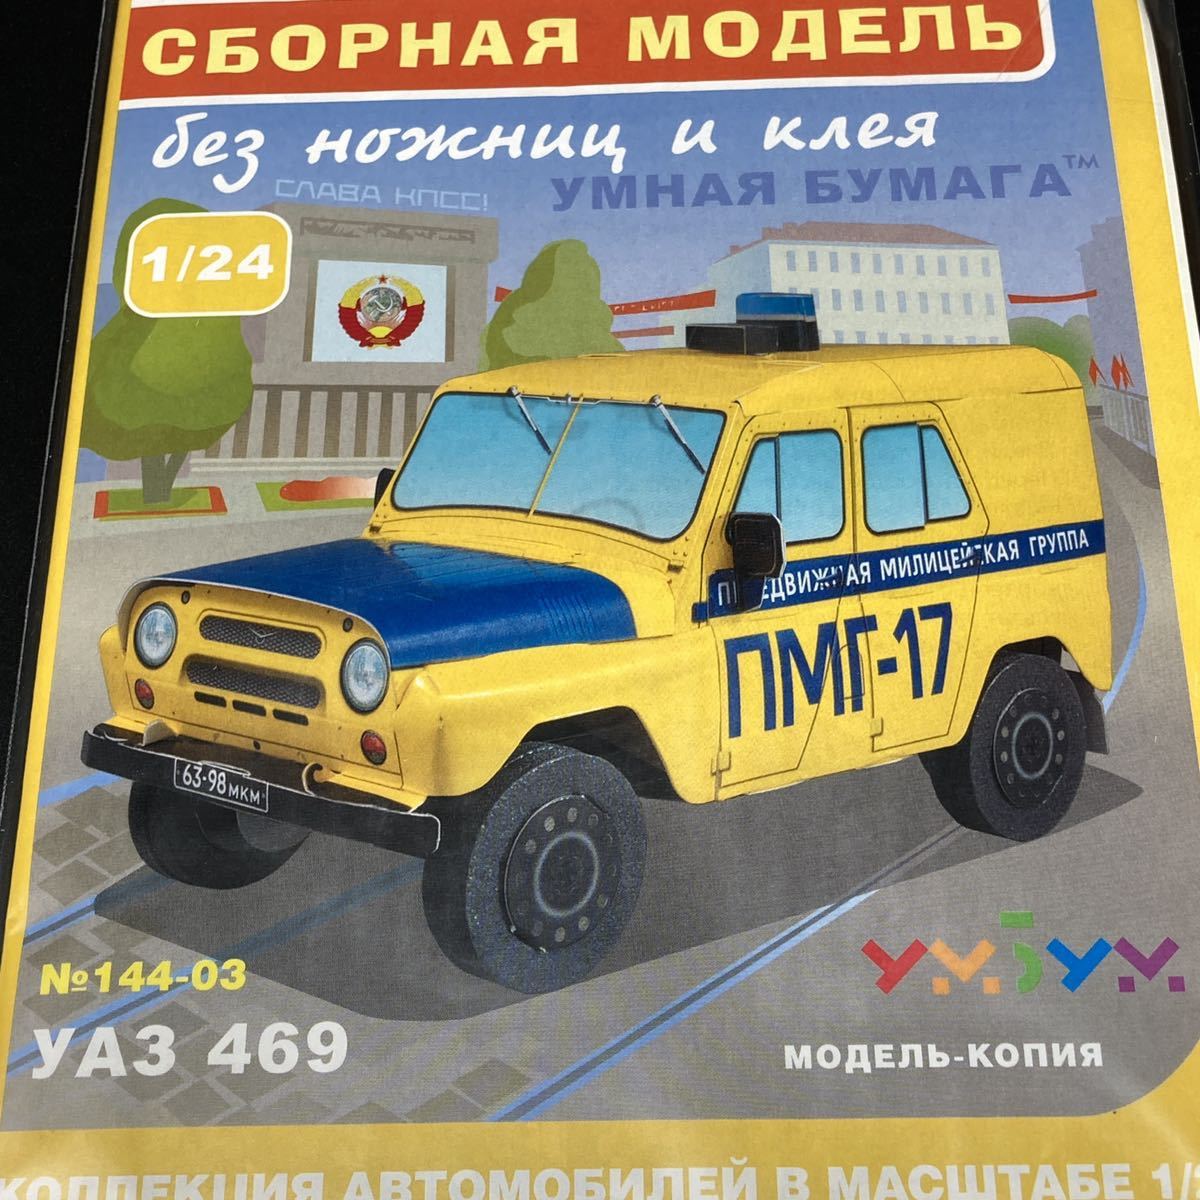 * real car . repeated reality * Russia paper craft Russia car UAZ patrol car yellow * free shipping *